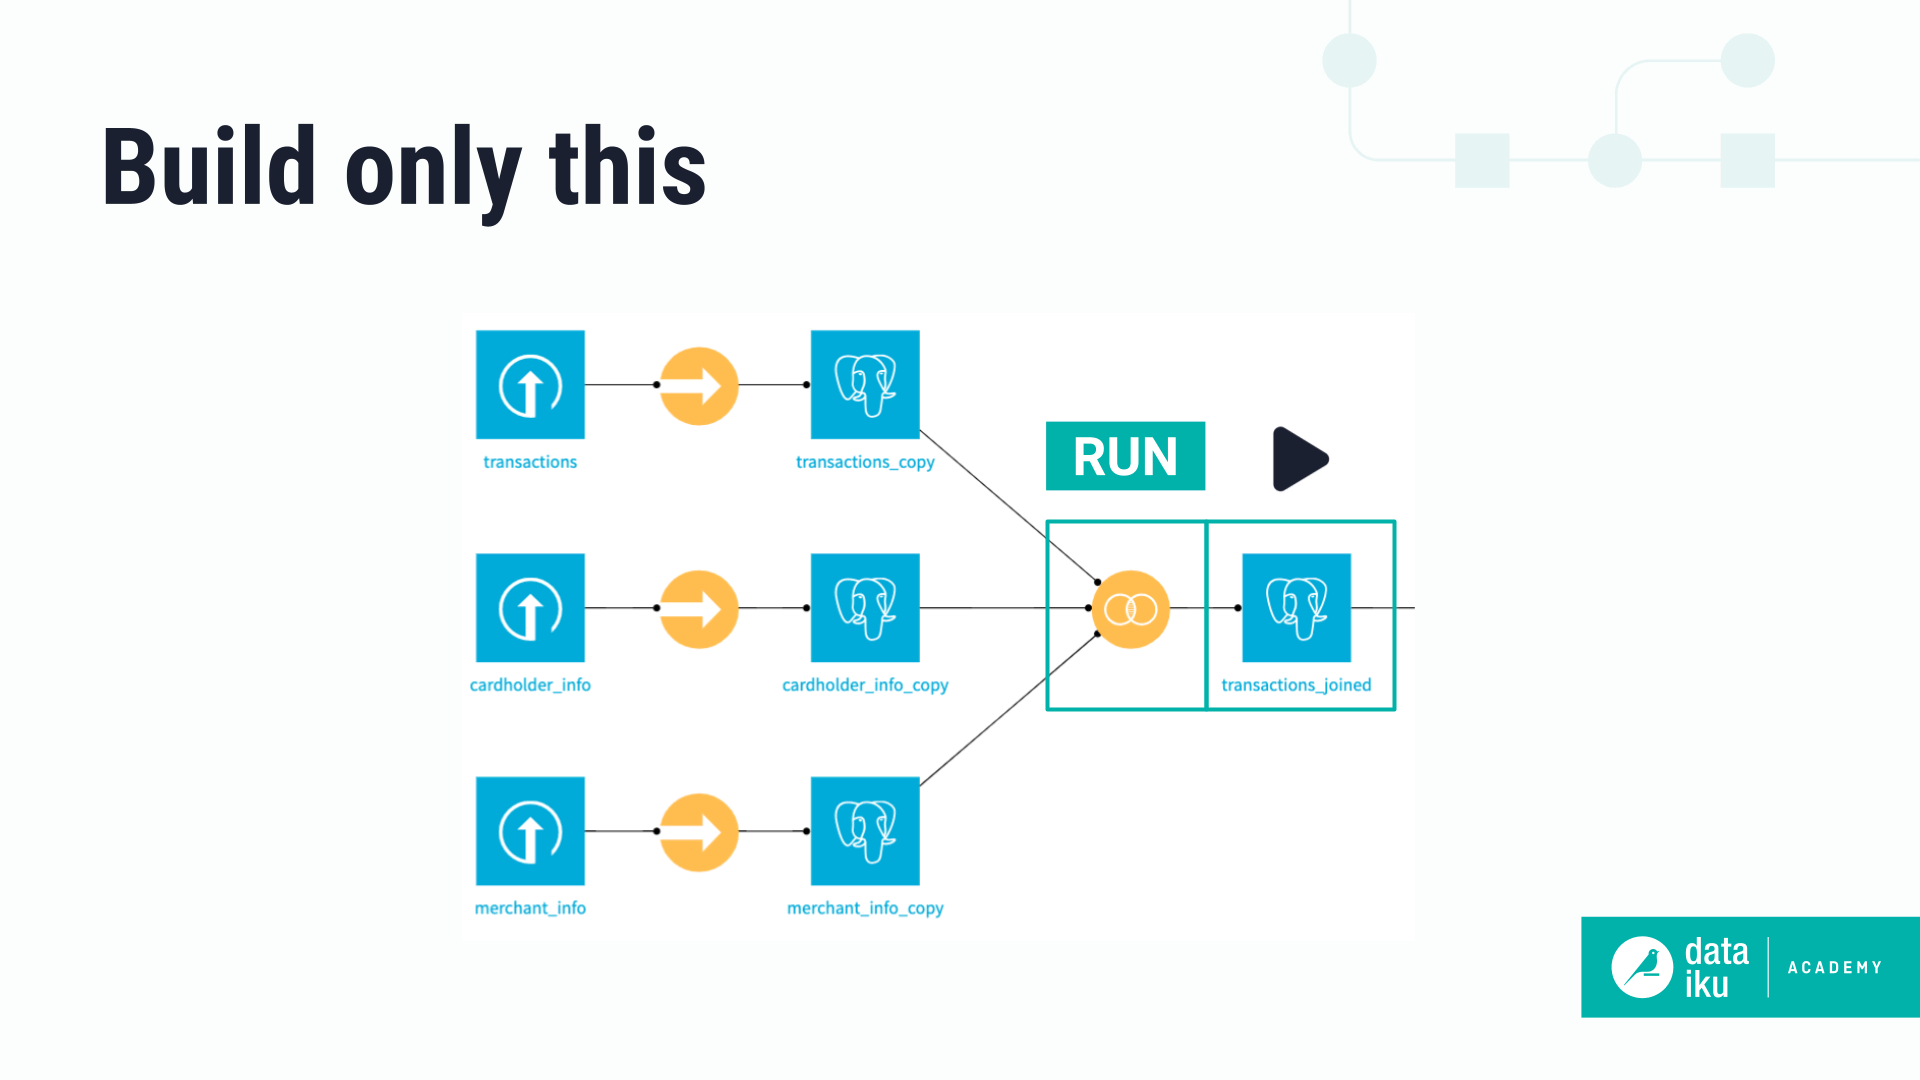 Slide showing flow items that run in a non-recursive build.